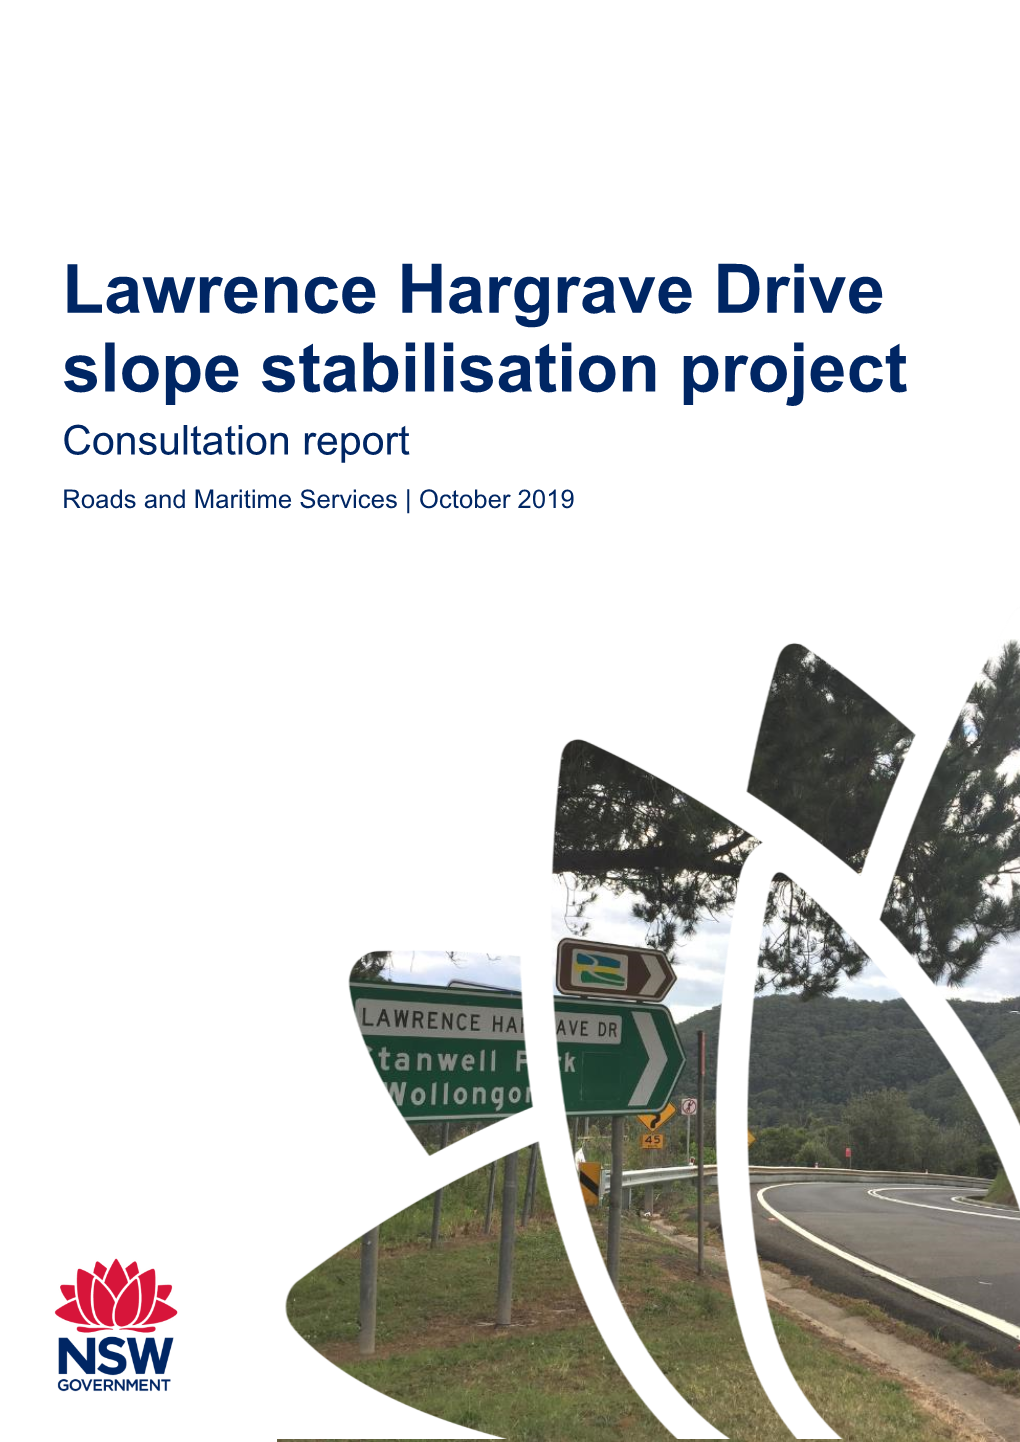 Lawrence Hargrave Drive Slope Stabilisation Project Consultation Report Roads and Maritime Services | October 2019